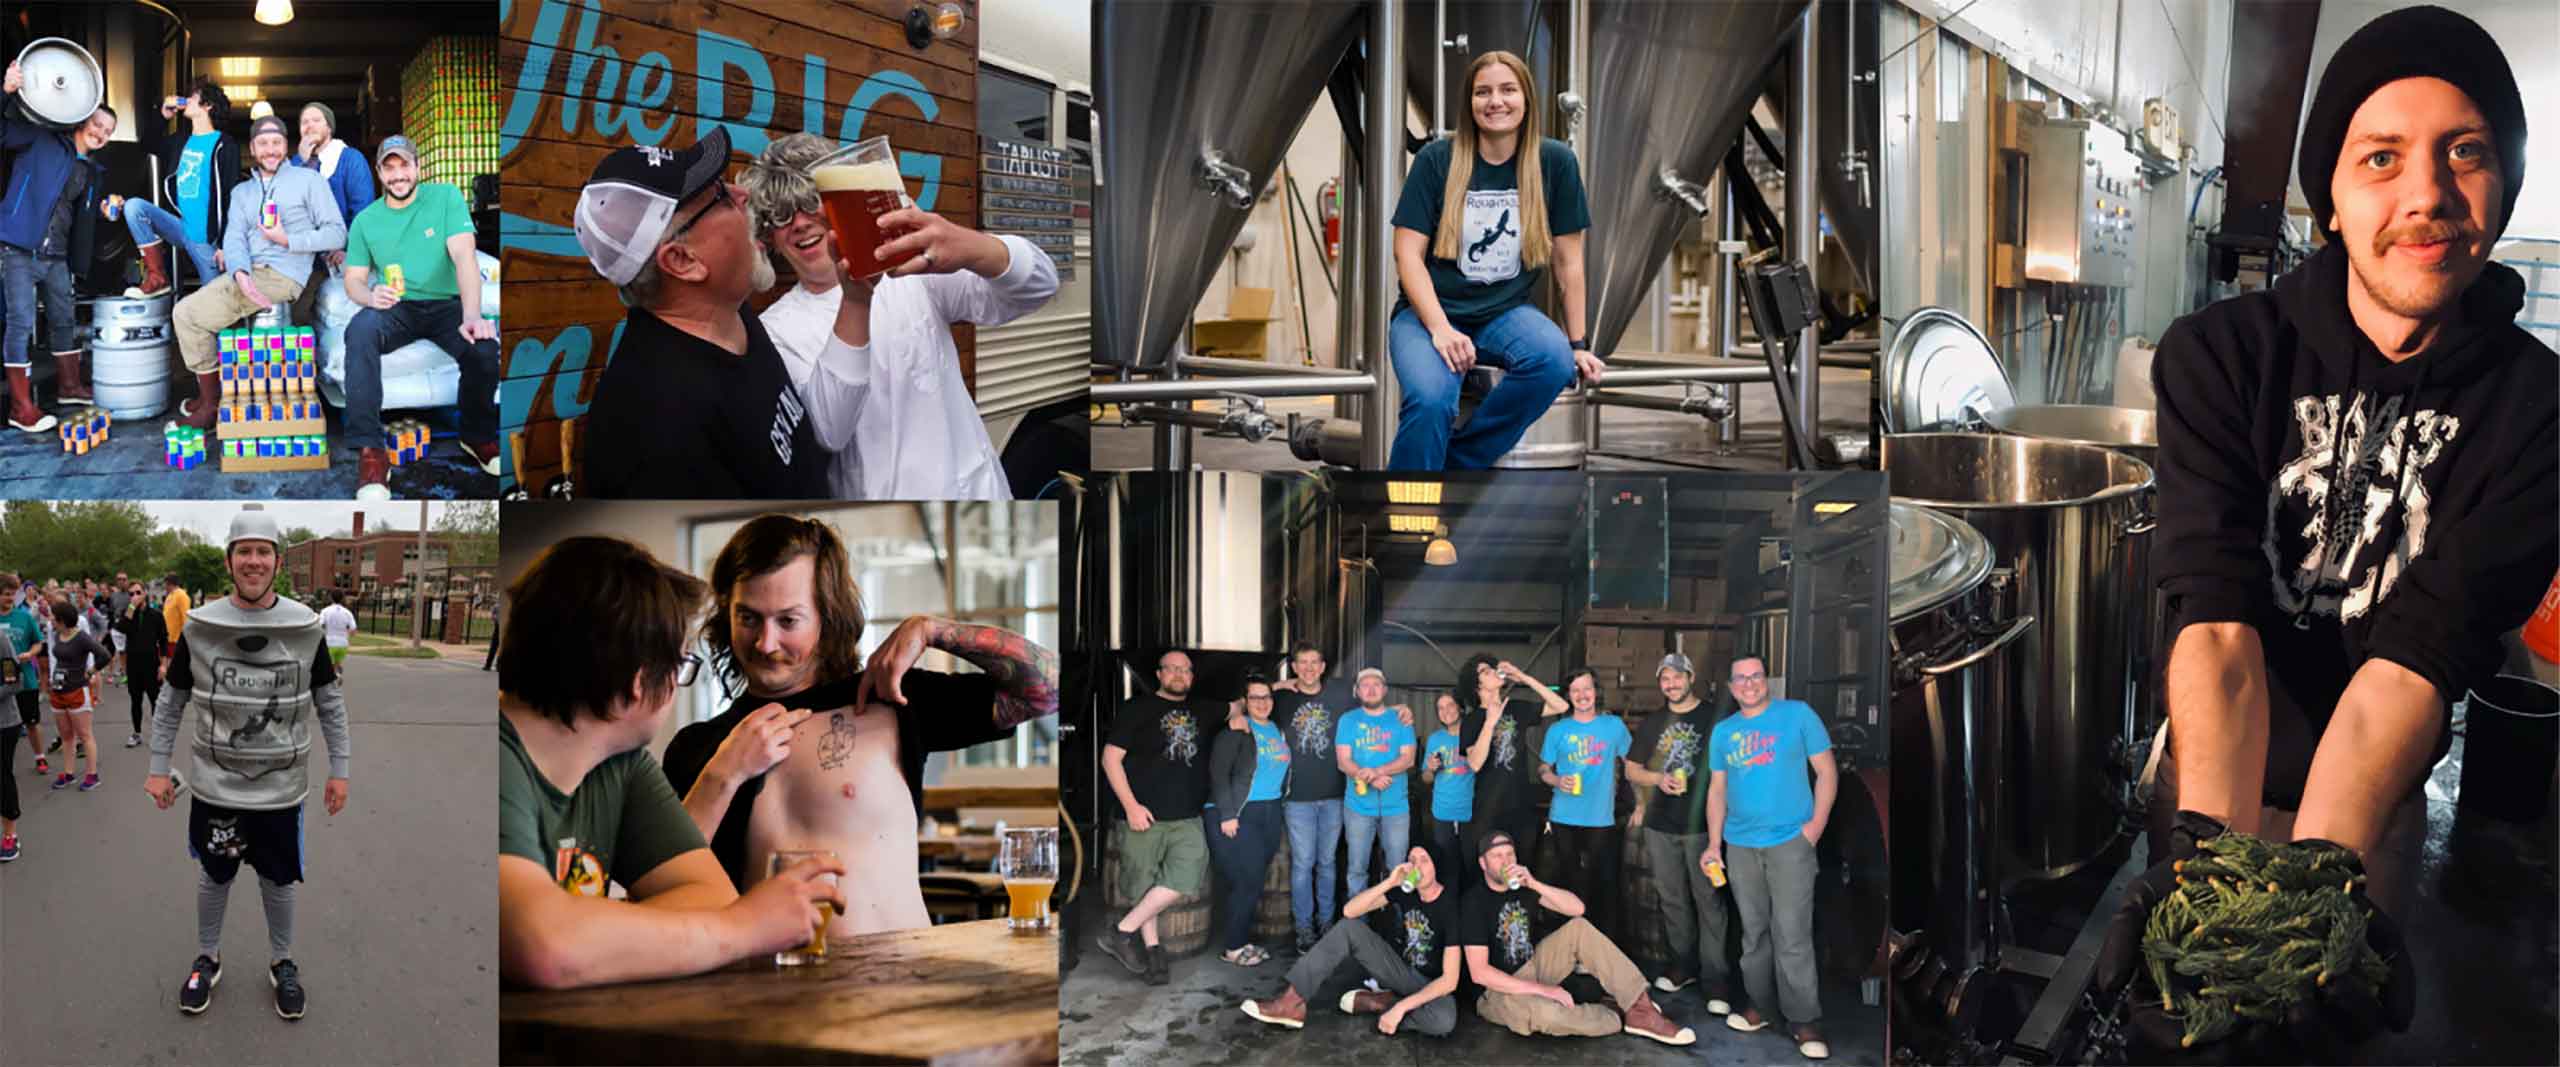 https://roughtailbeer.com/wp-content/uploads/2021/05/team-collage-02.jpg